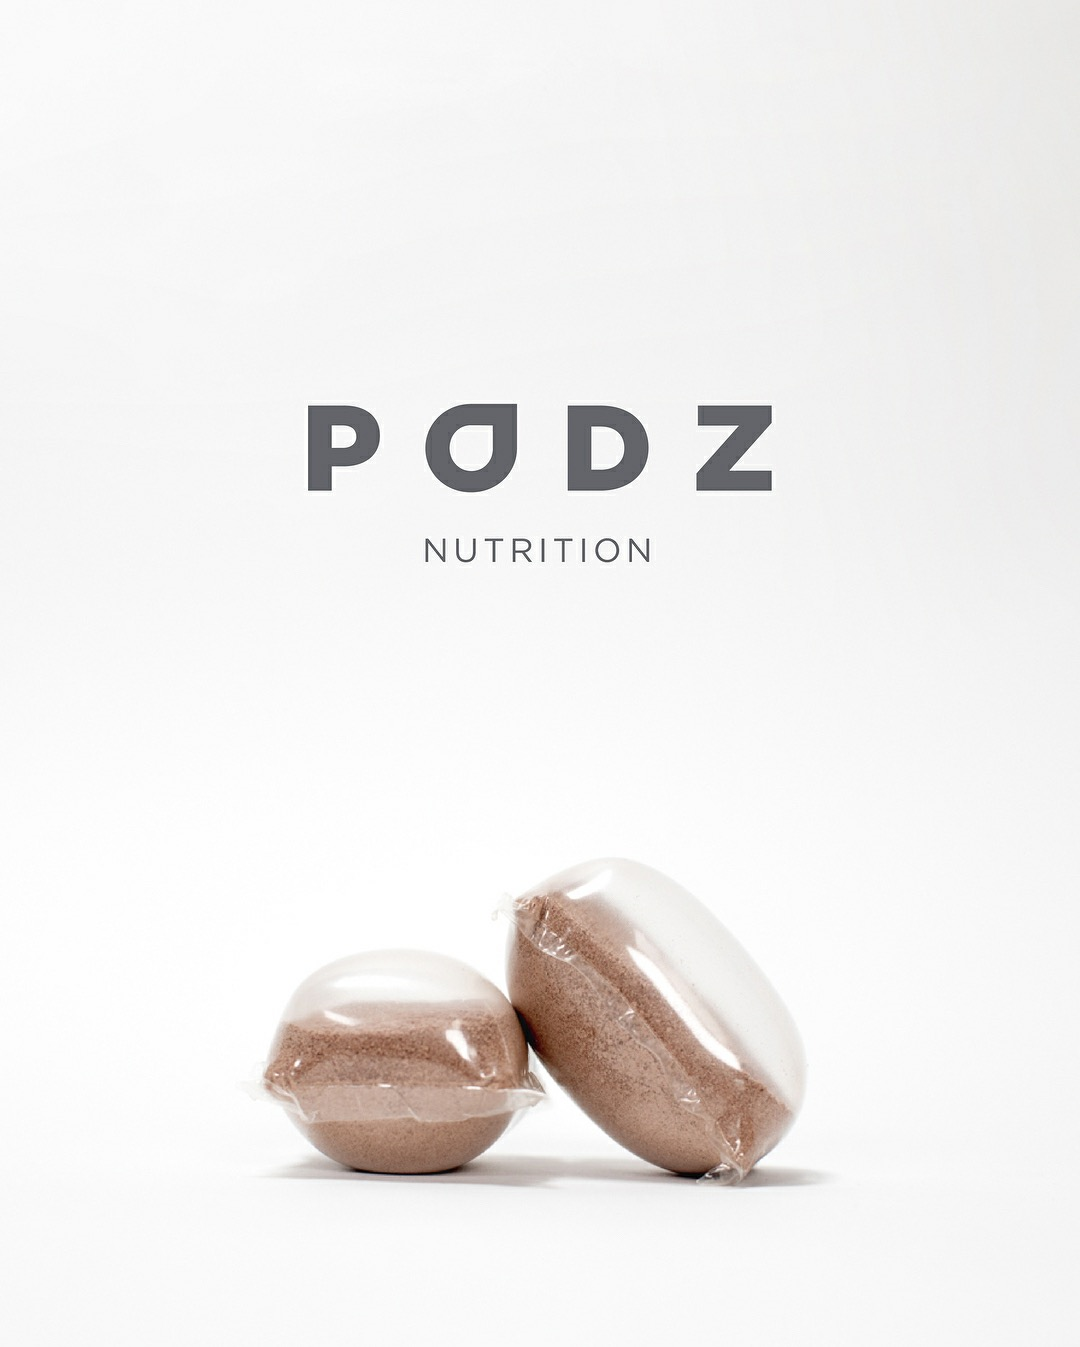 PODZ Nutrition Packs Four Different Proteins Into One Dissolvable Pod, by  Mark Barroso